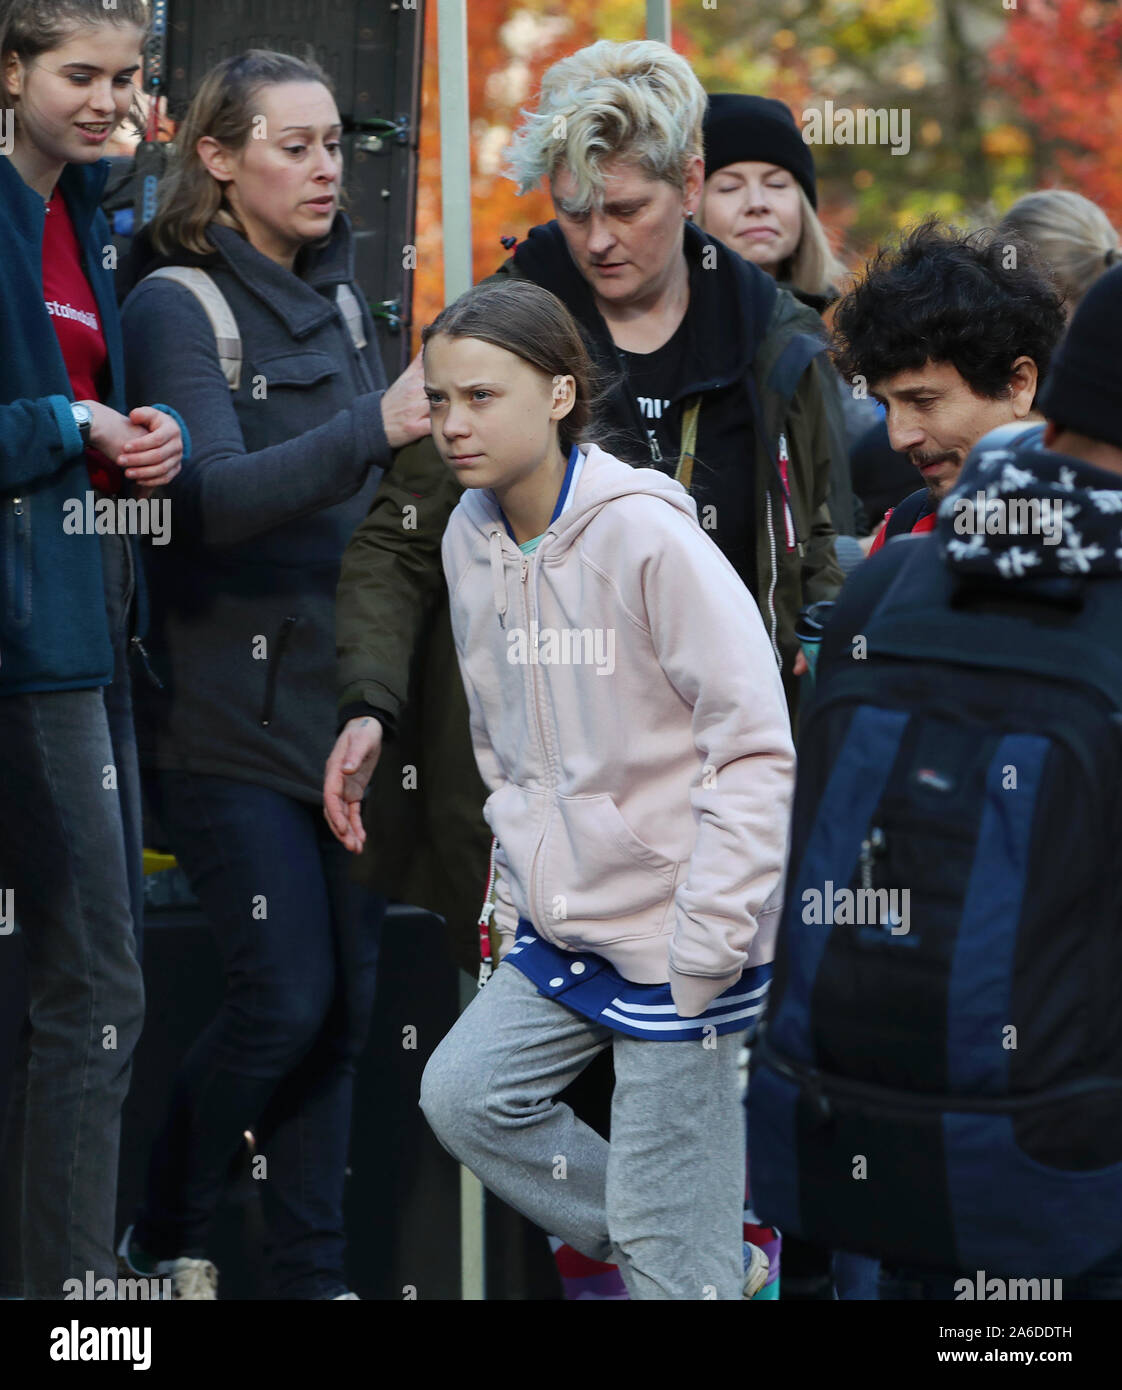 Swedish teen activist Greta Thunberg arrives for the post federal election Friday climate strike march starting and ending at the Vancouver Art Gallery in Vancouver, British Columbia on October 25, 2019. Organized by local youth-led, Sustainabiliteens, Greta and a turn out of nearly 10,000 climate activists demand action from industry and the various levels of government and are supporting the 15-youth who announced their plans to sue the federal government alleging it has contributed to climate change. Photo by Heinz Ruckemann/UPI Stock Photo